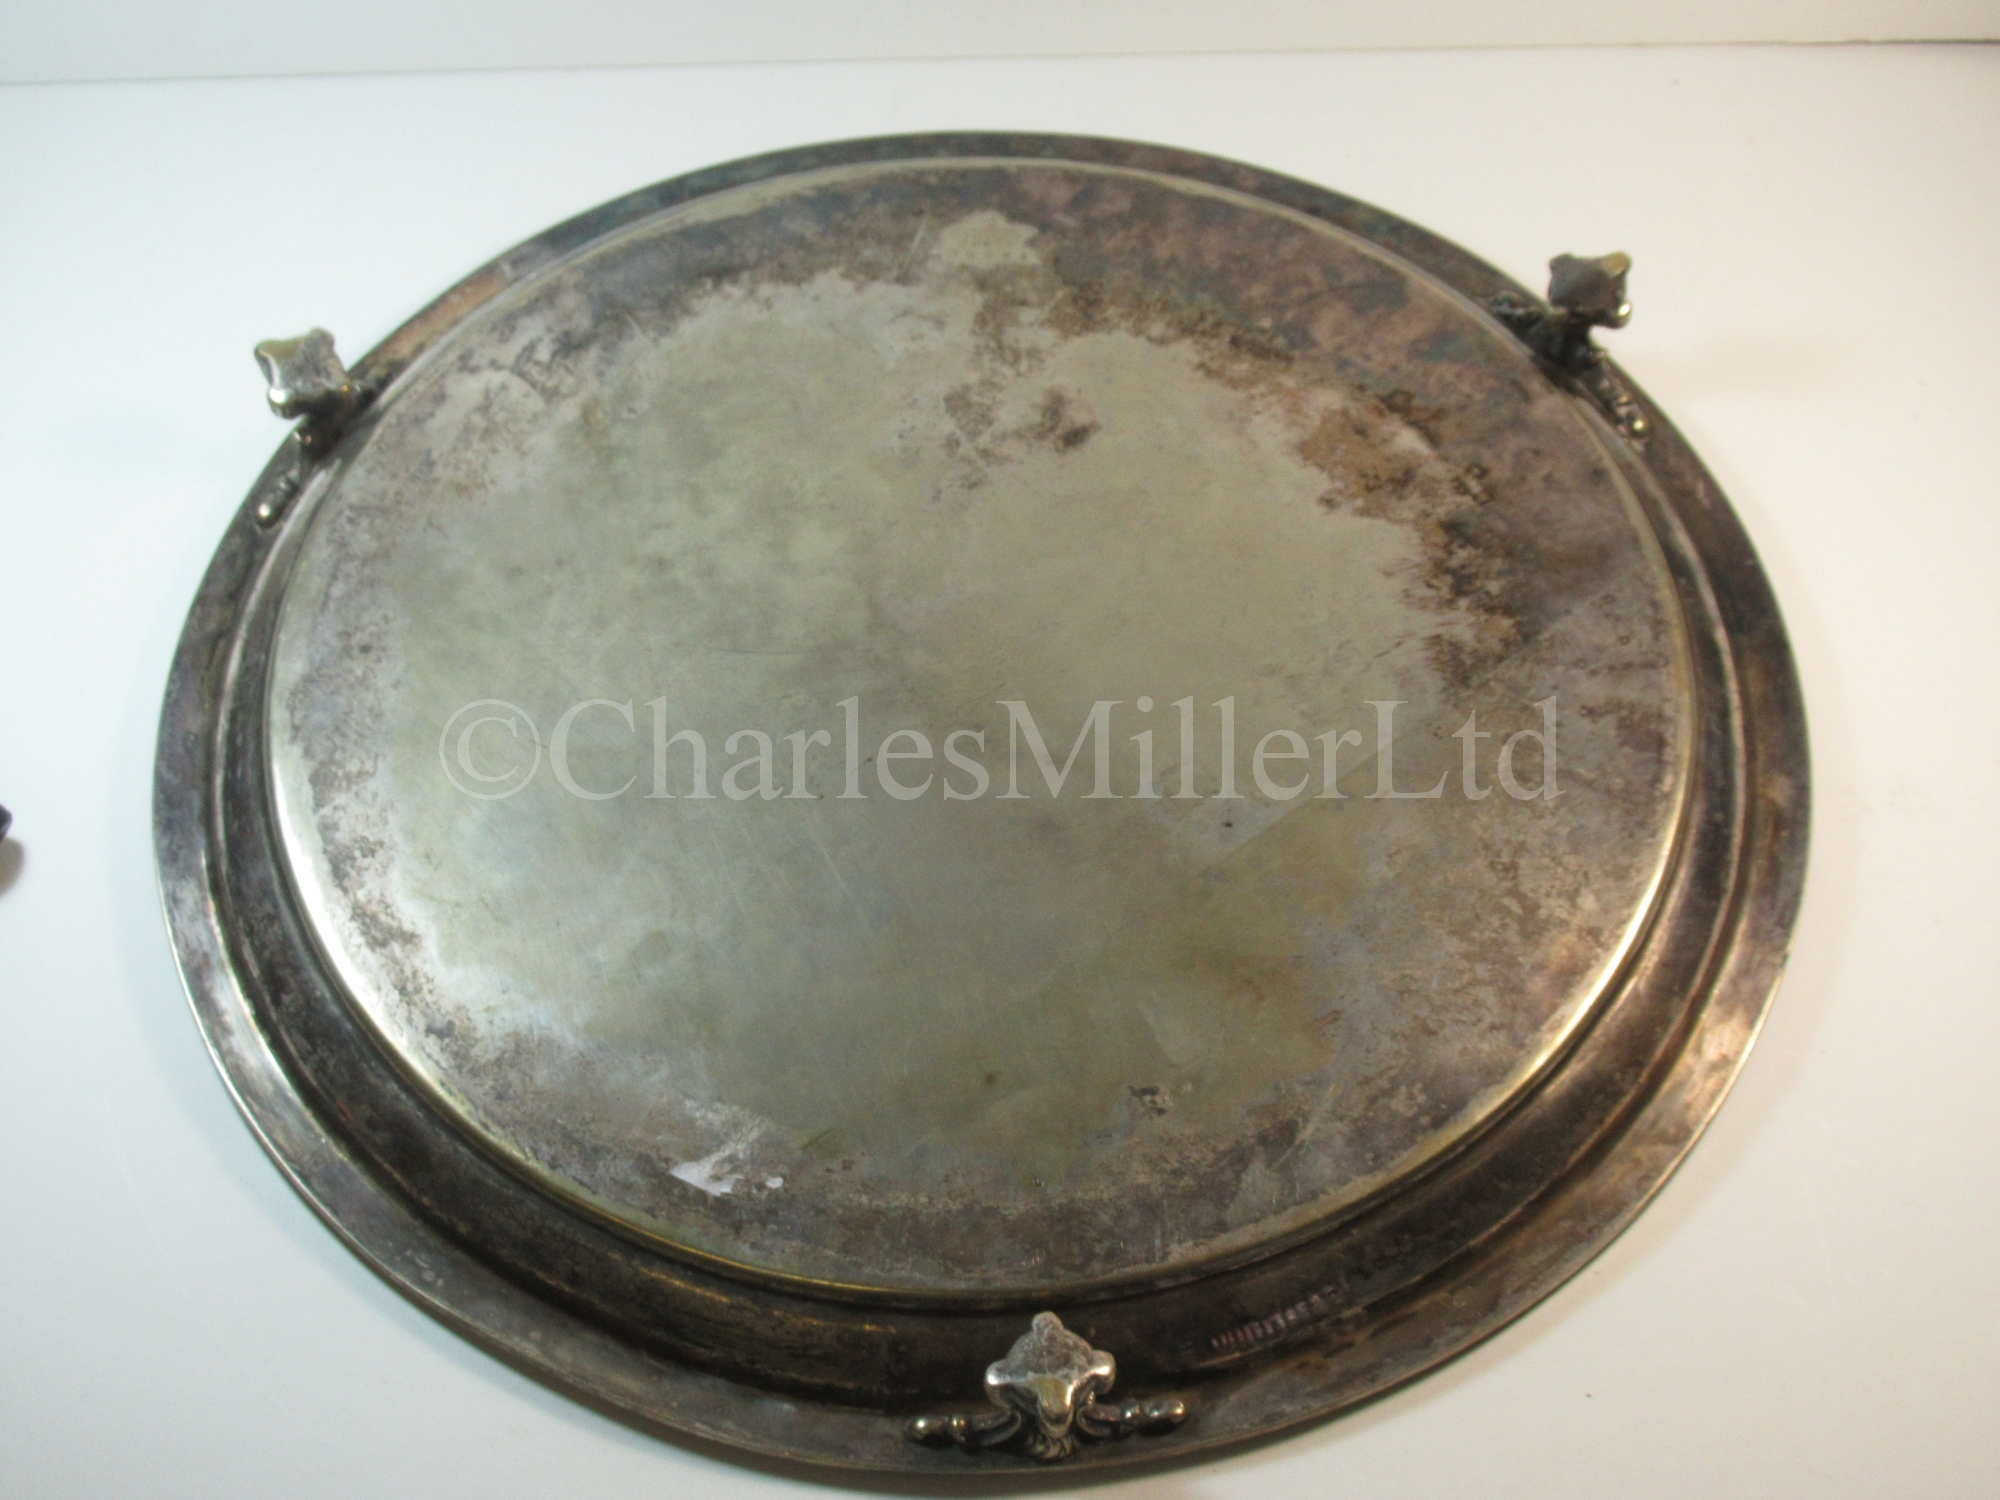 A Clyde Shipping Company Ltd plated serving tray, with three feet - Image 6 of 6